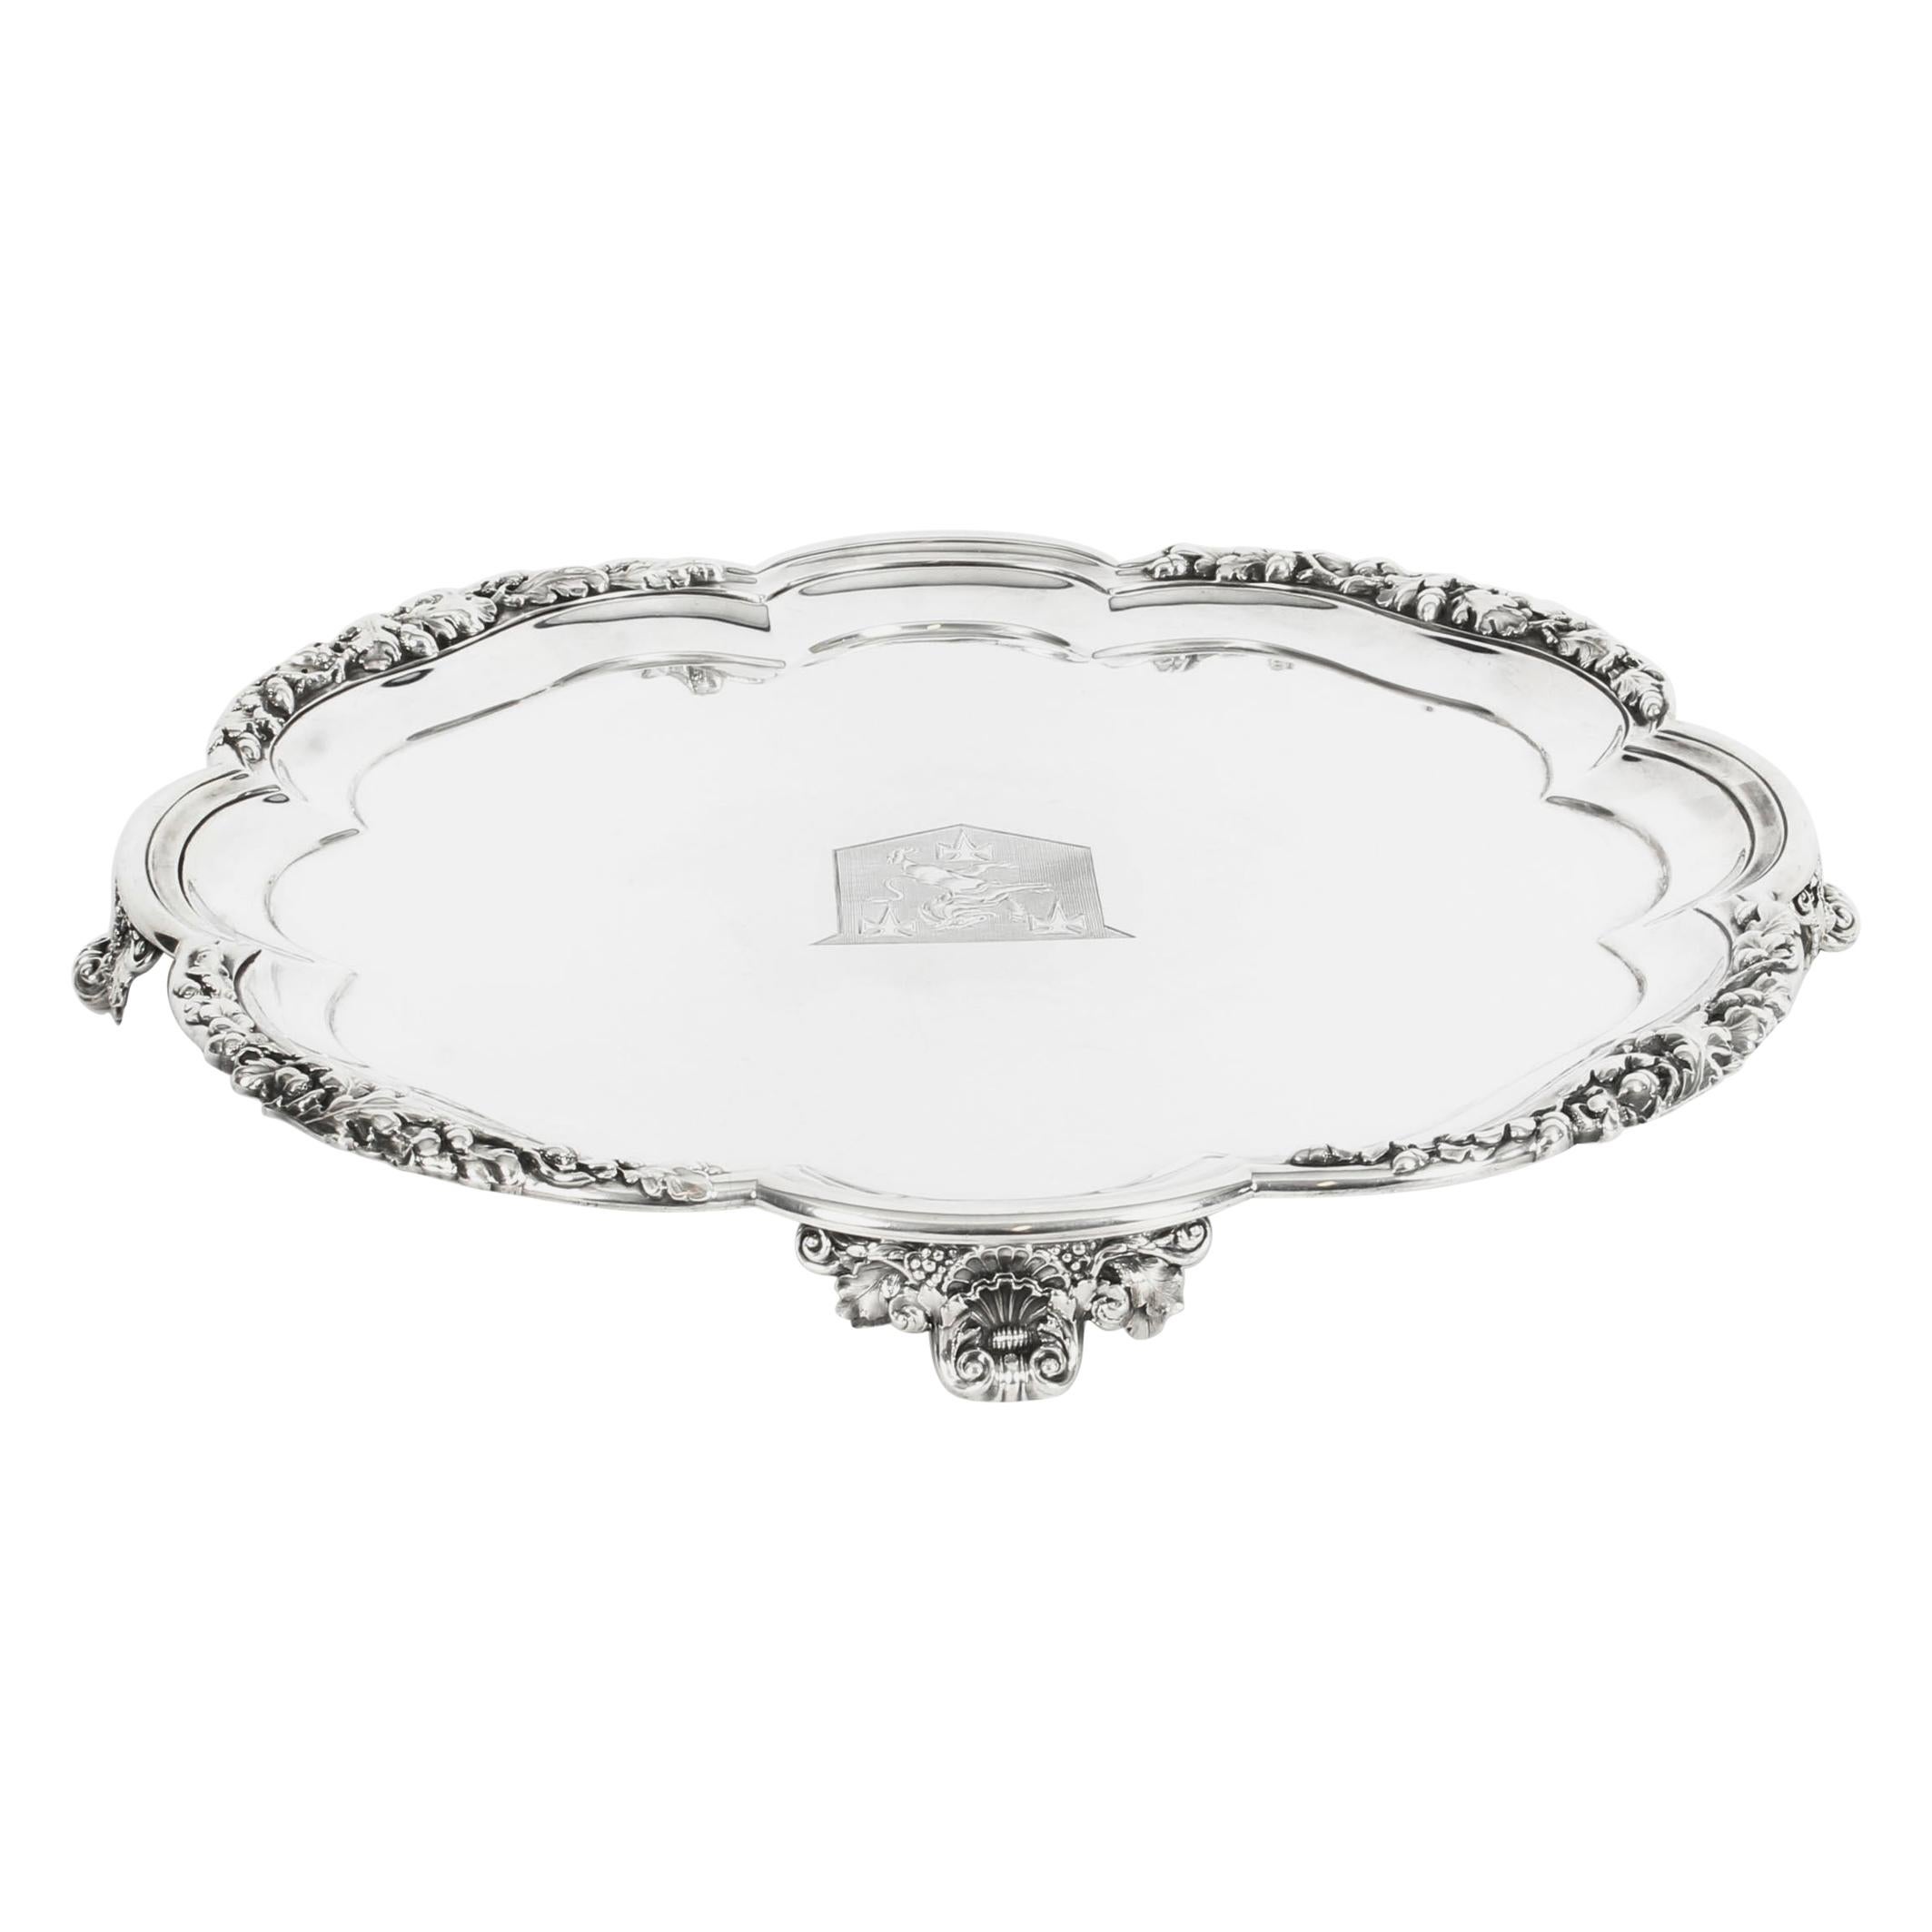 Antique William IV Silver Tray Salver by Paul Storr 1837 19th Century